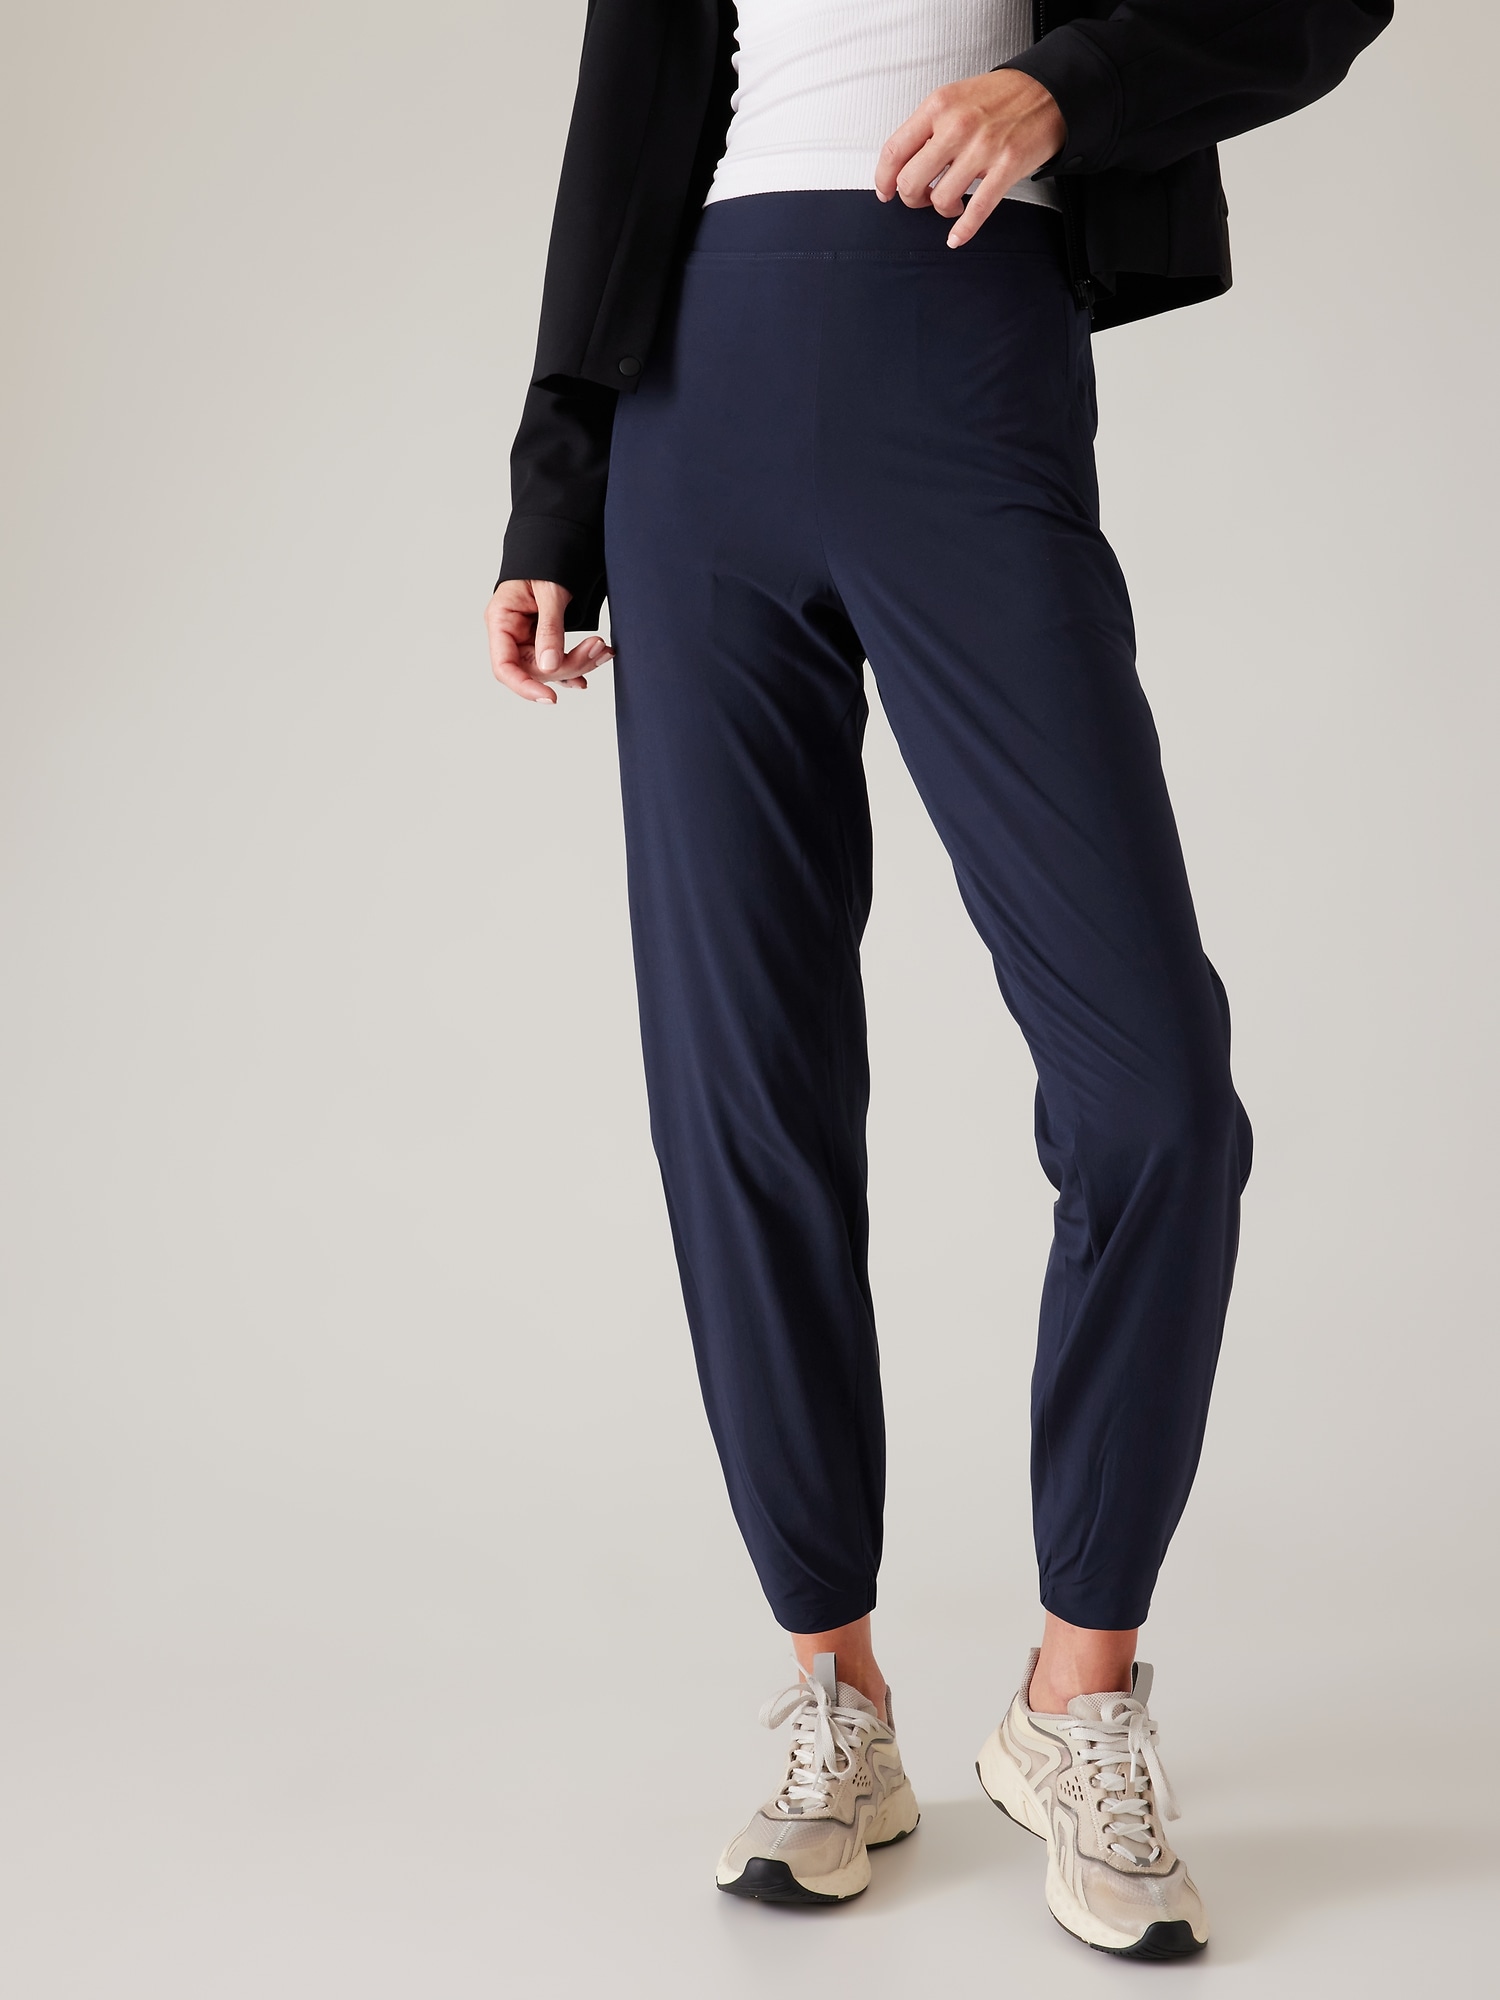 Athleta Brooklyn Heights High Rise Jogger In Navy